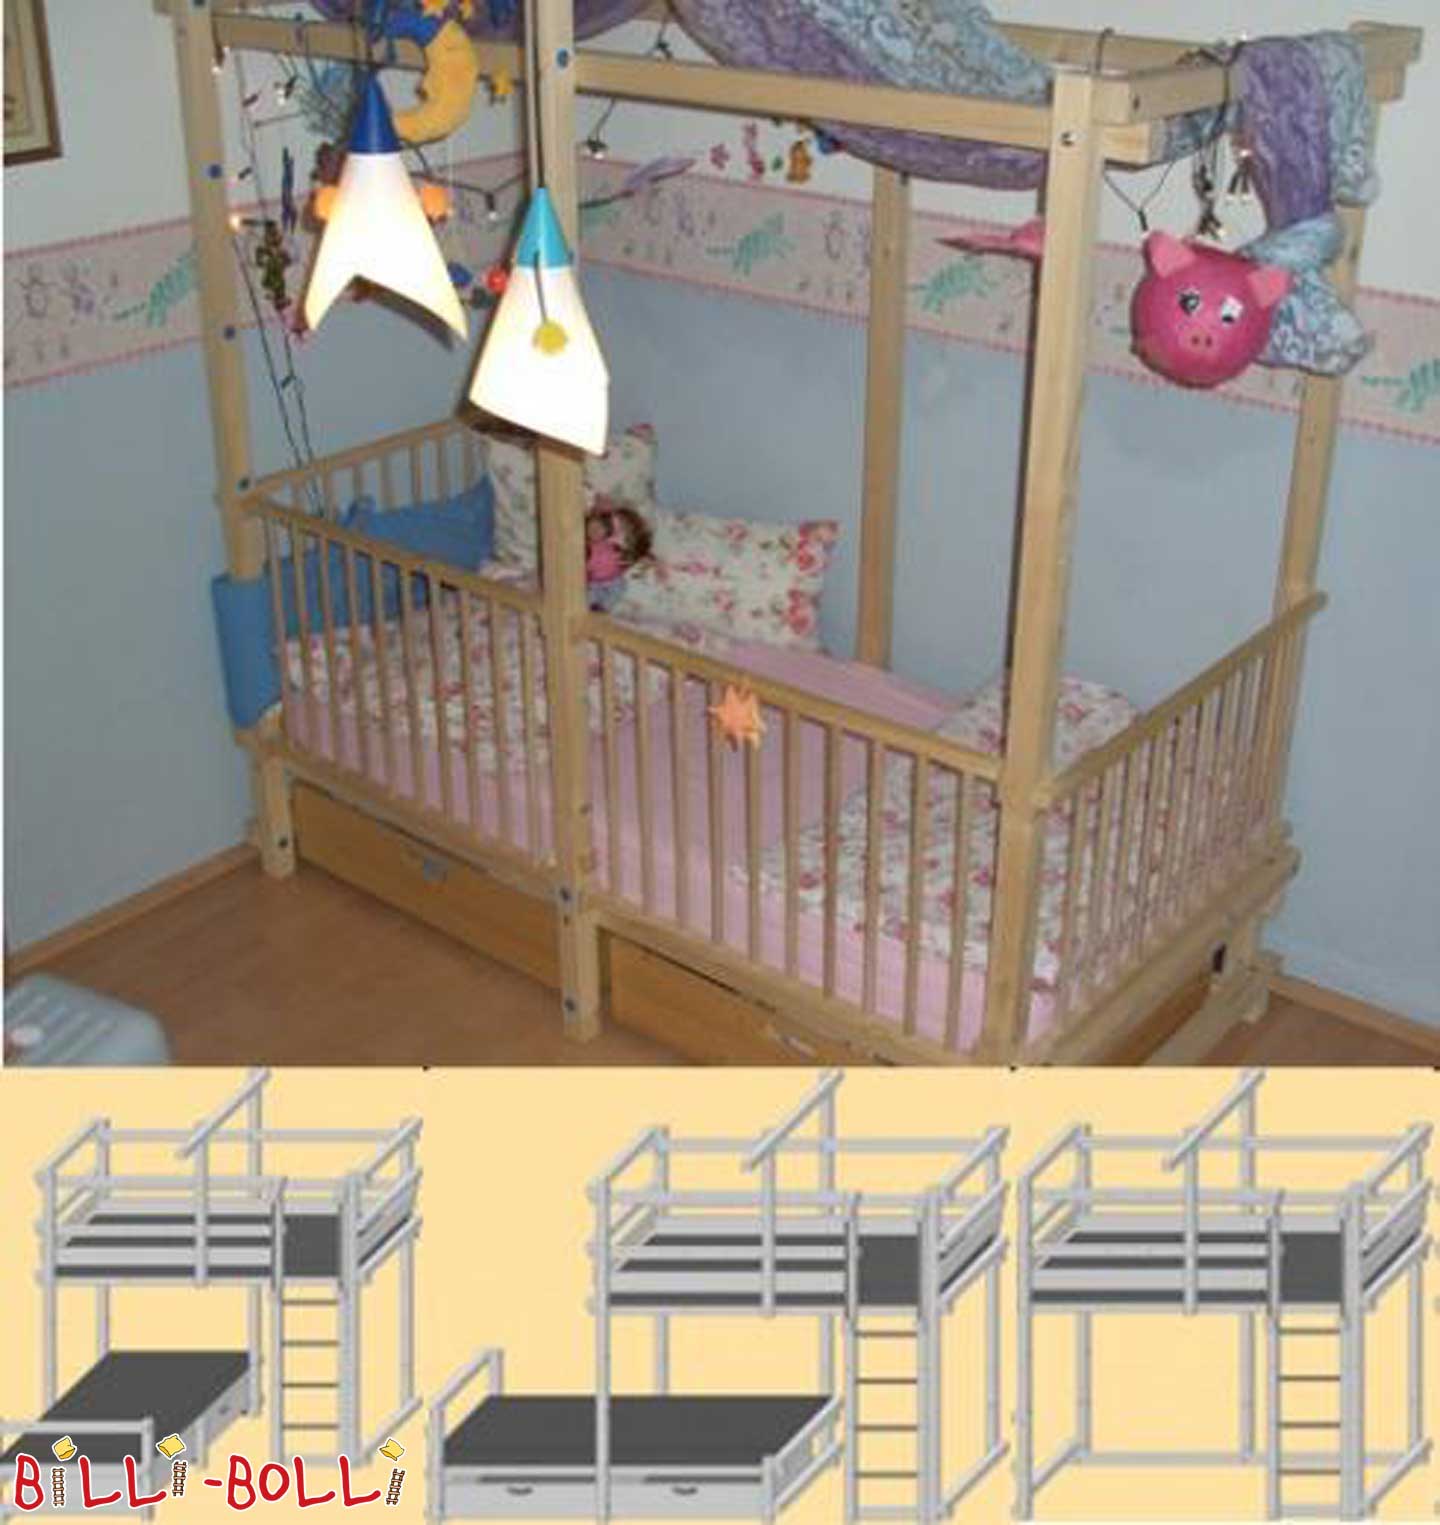 Giant Billi-Bolli bed facility (Category: second hand baby crib)